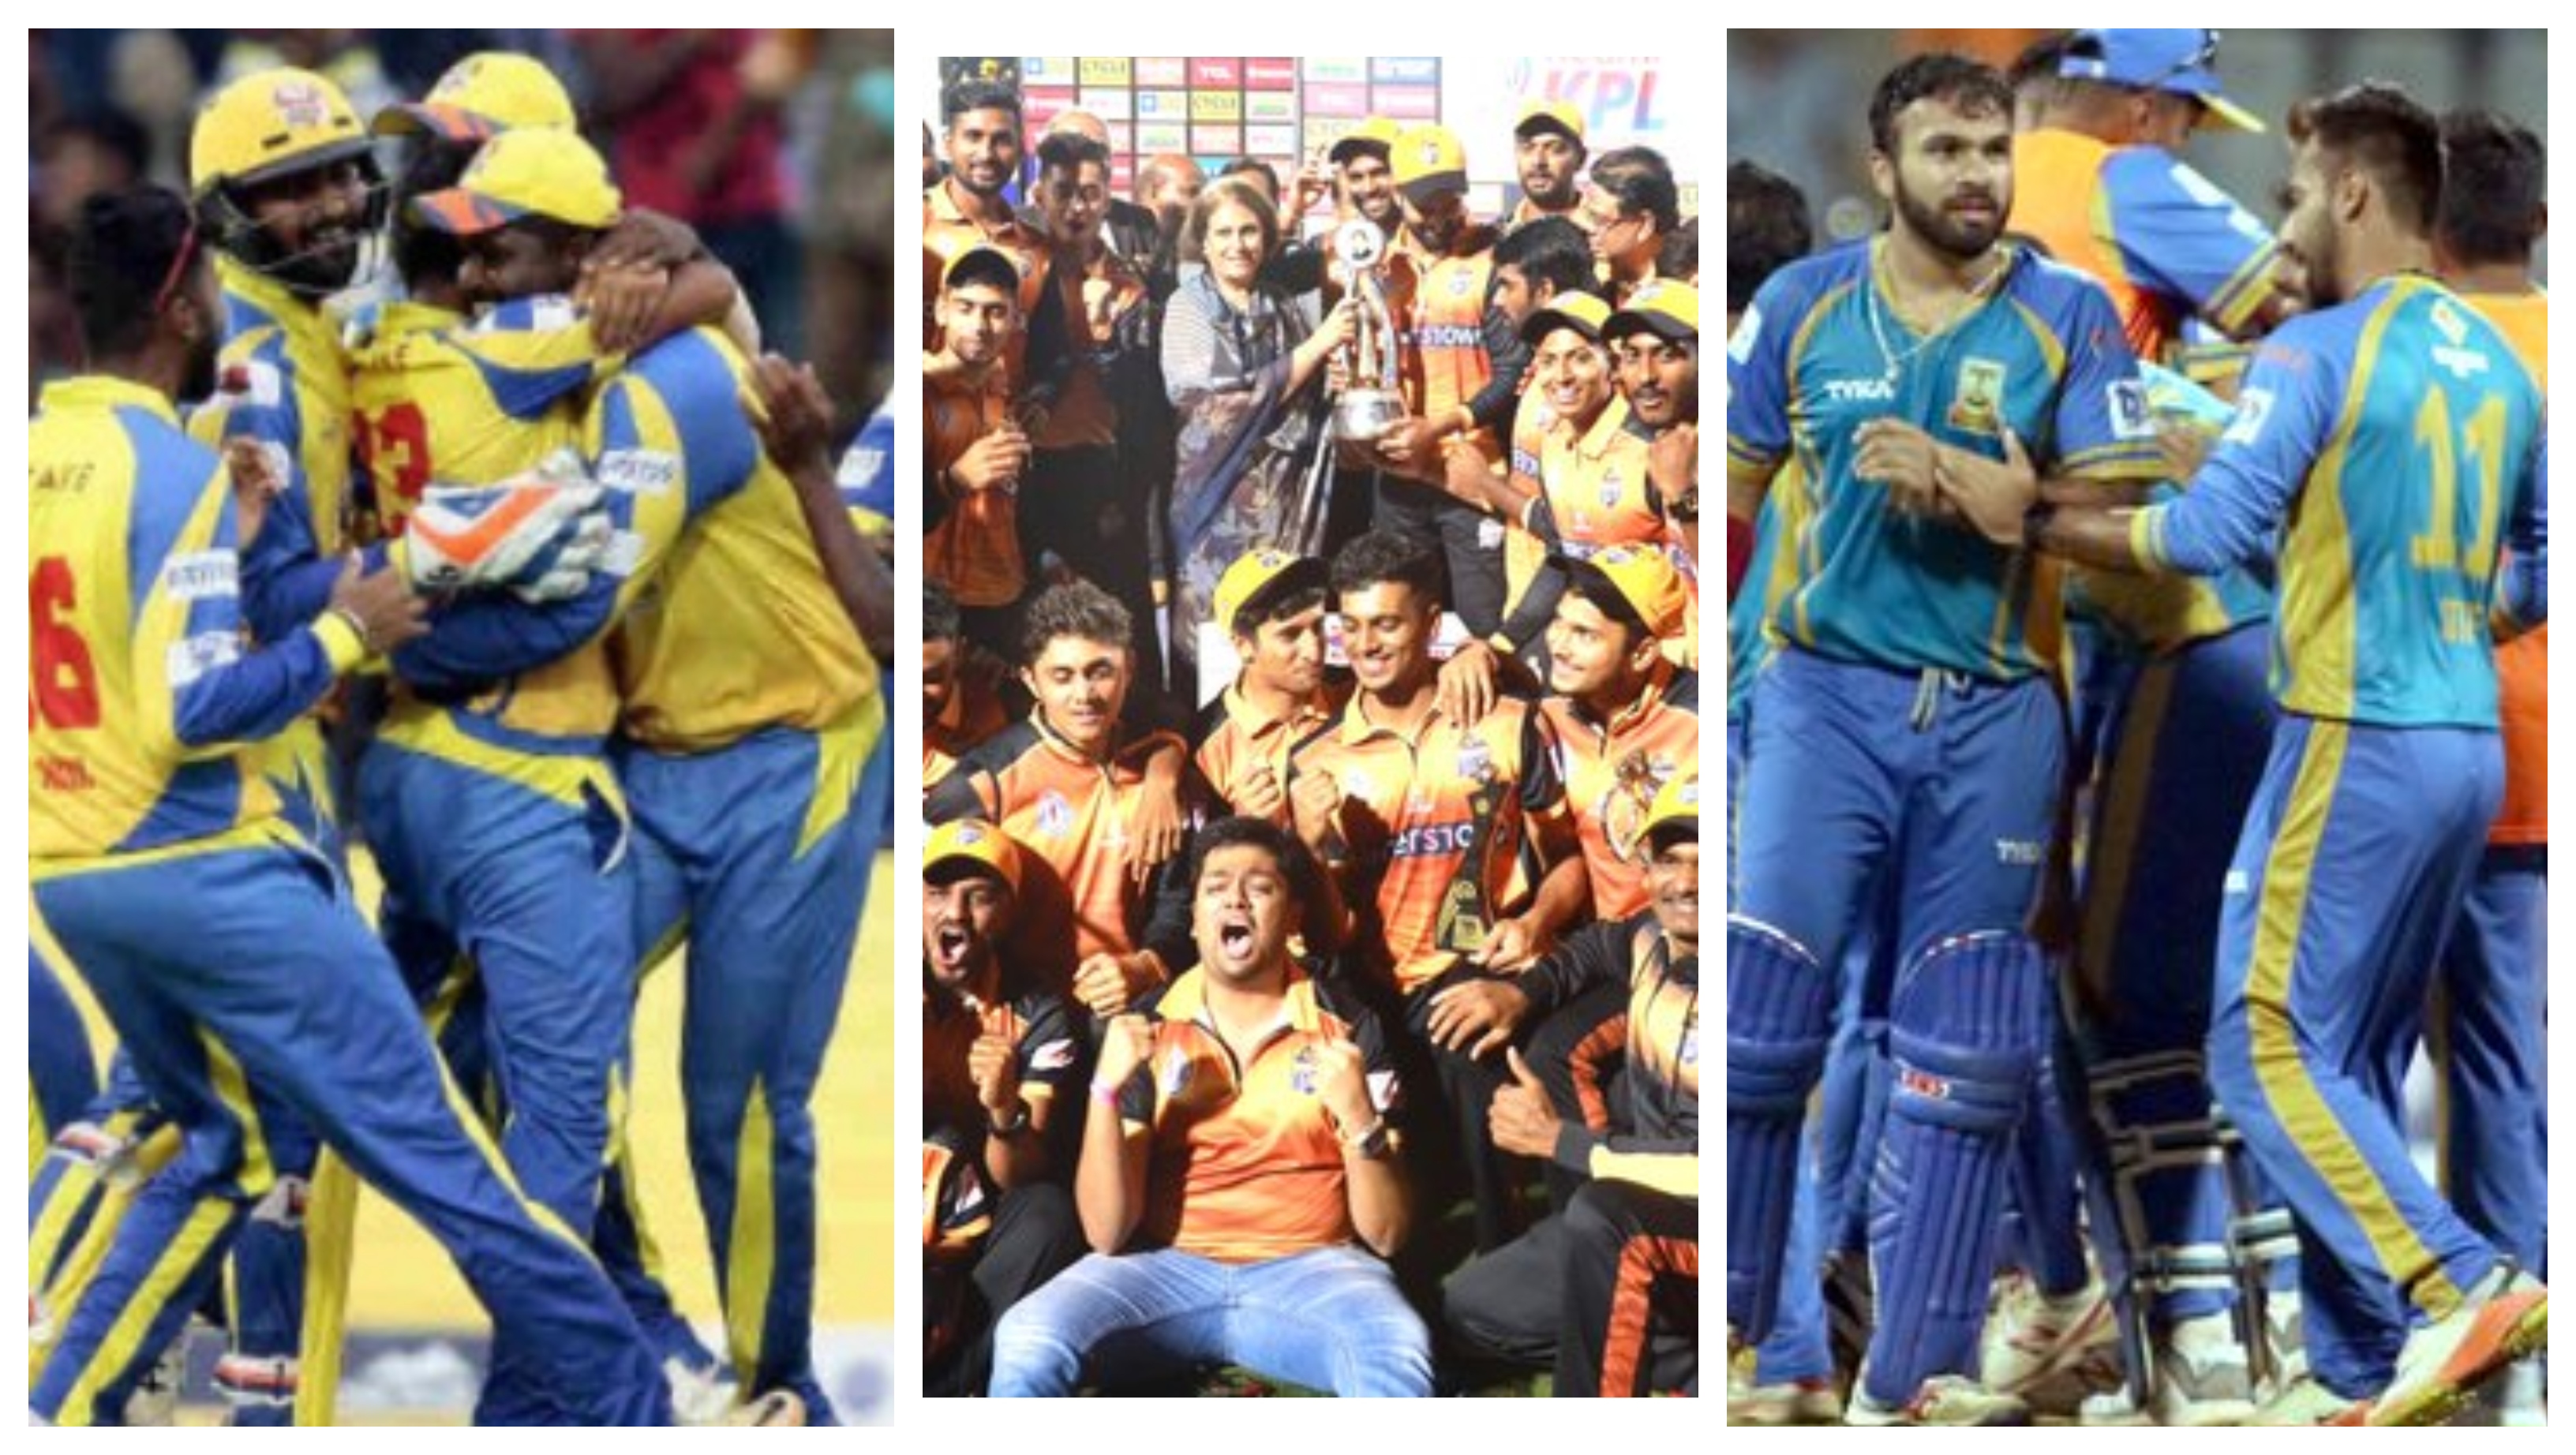 India's local T20 leagues have come under the scanner for corruption claims